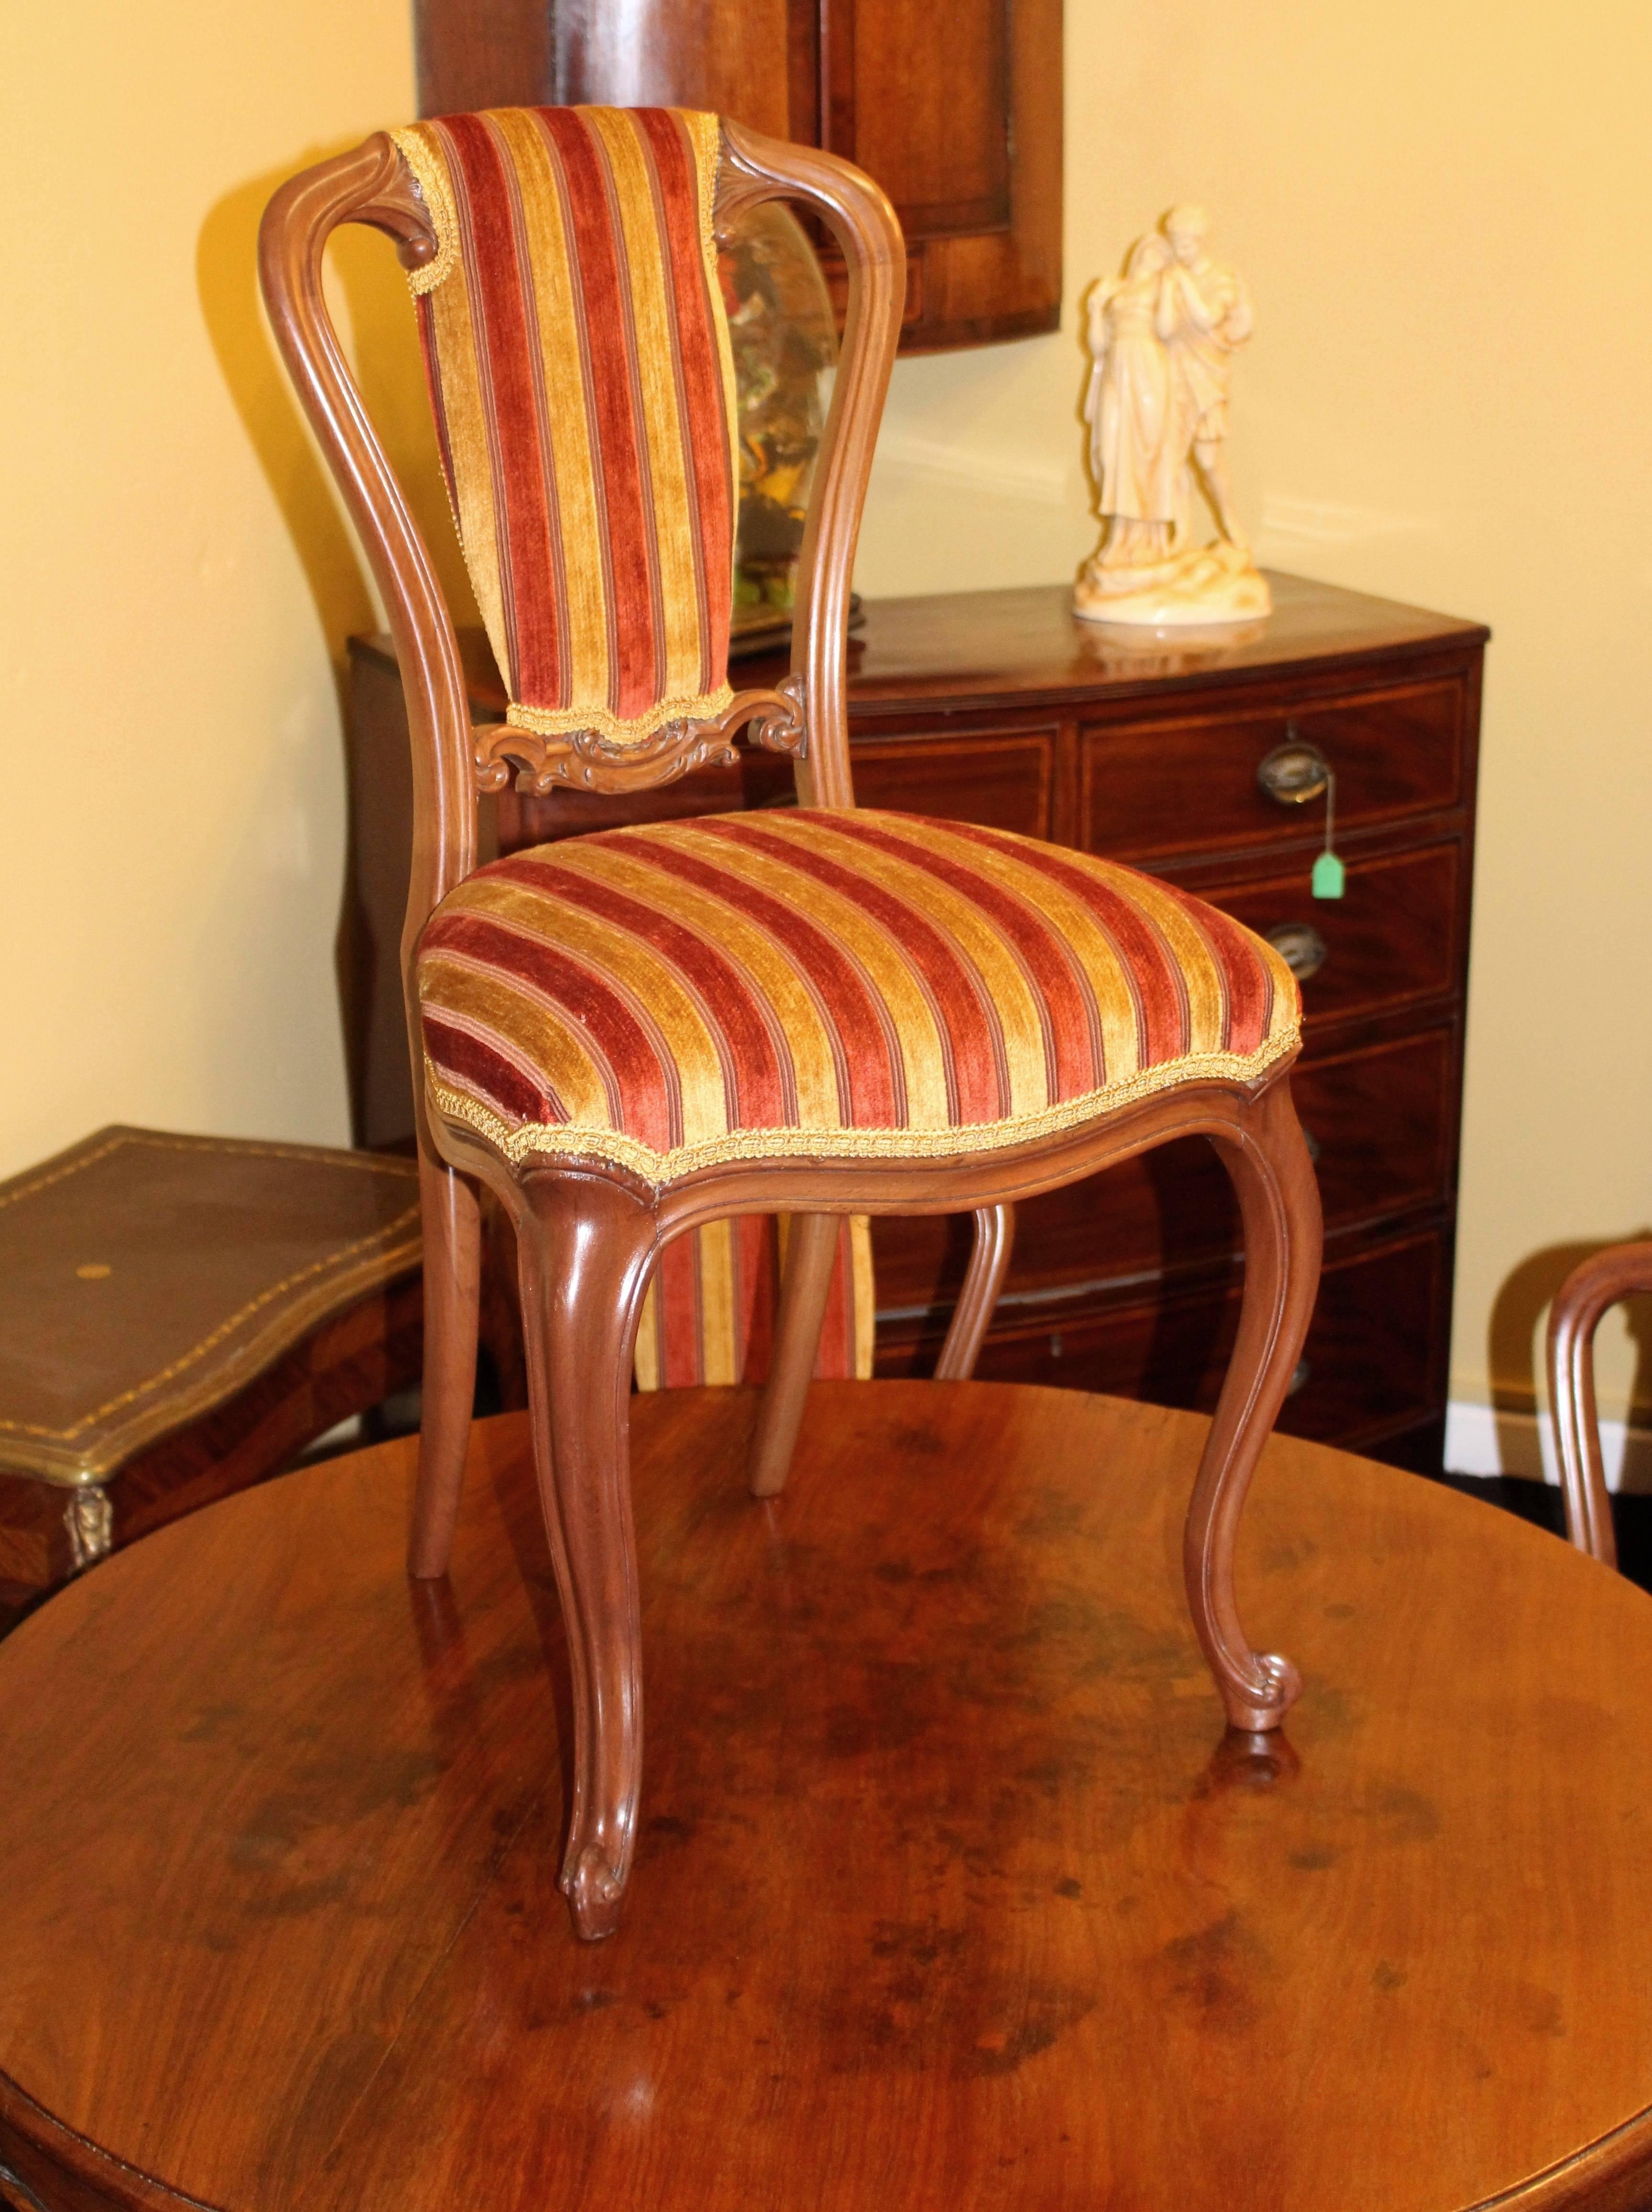 

Width 45 cm 17 3/4 in.
Depth 39 cm 15 1/4 in.
Height (to top rail) 85 cm 33 1/2 in.
Height (to seat) 47 cm 18 1/2 in.

Set of six.
Period Victorian.
Wood walnut.
Seats newly upholstered in a quality striped fabric fully up to British